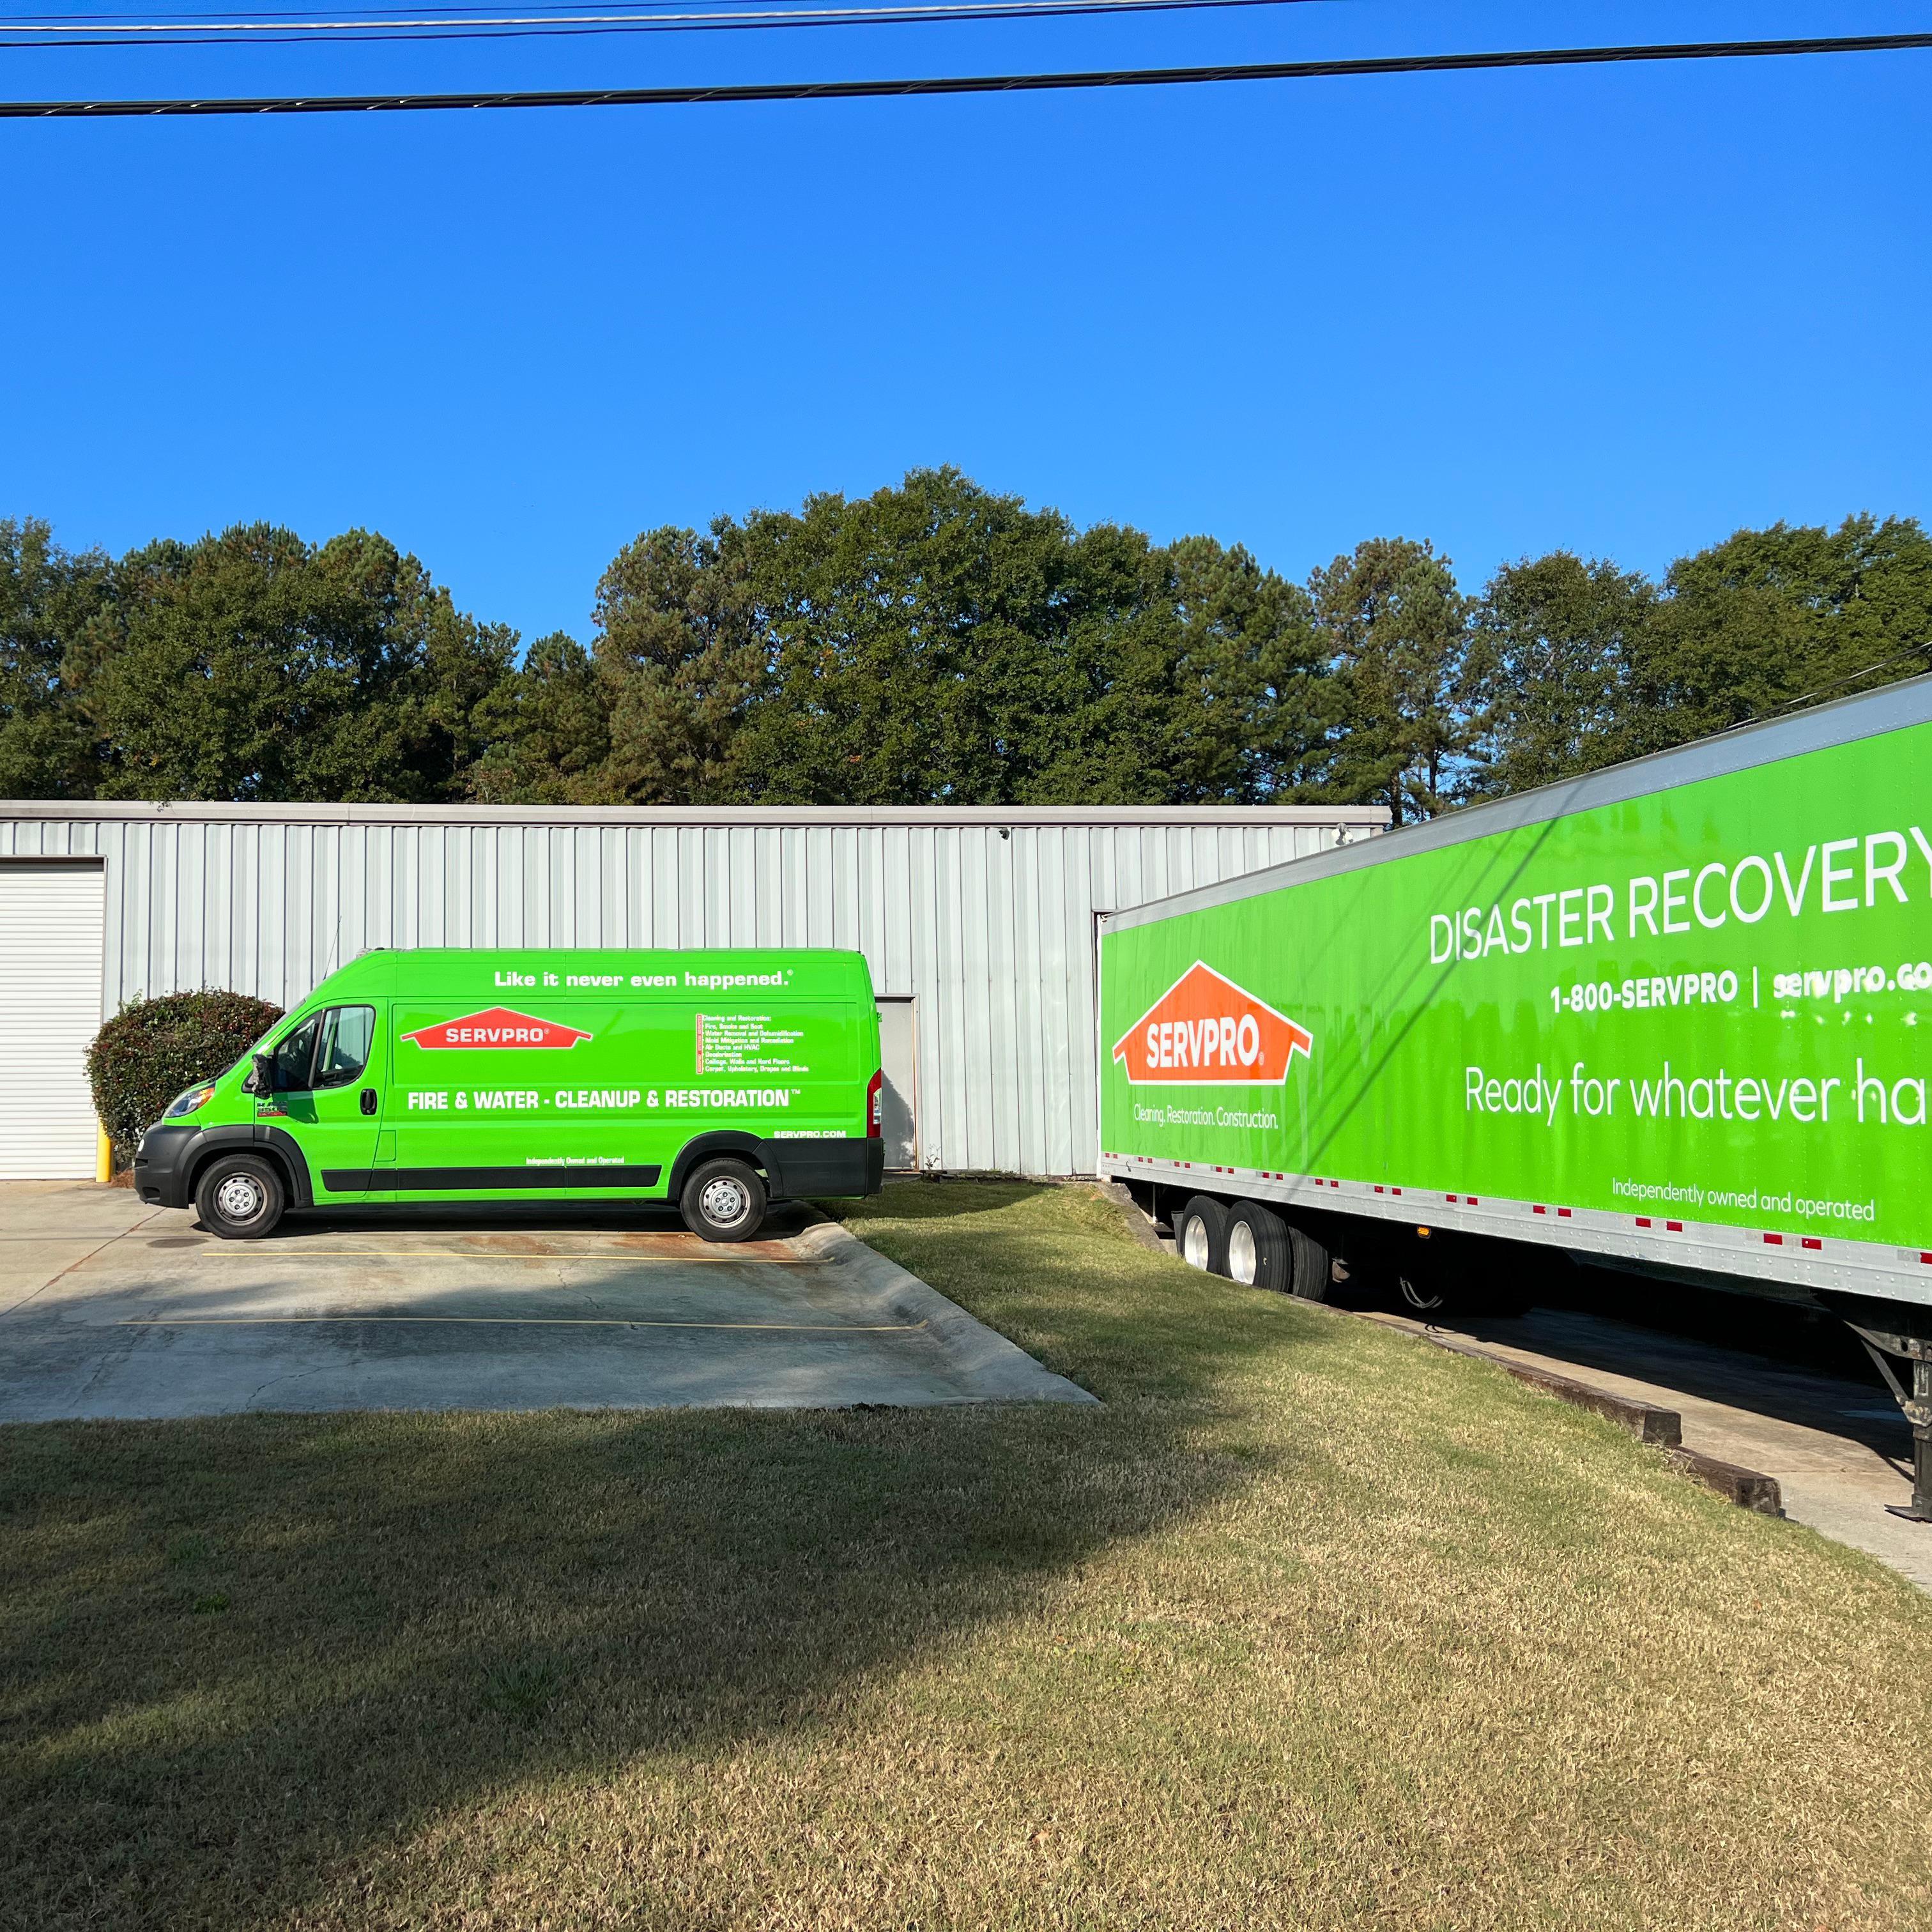 Two SERVPRO of Jackson and Madison Counties trucks in the parking lot.